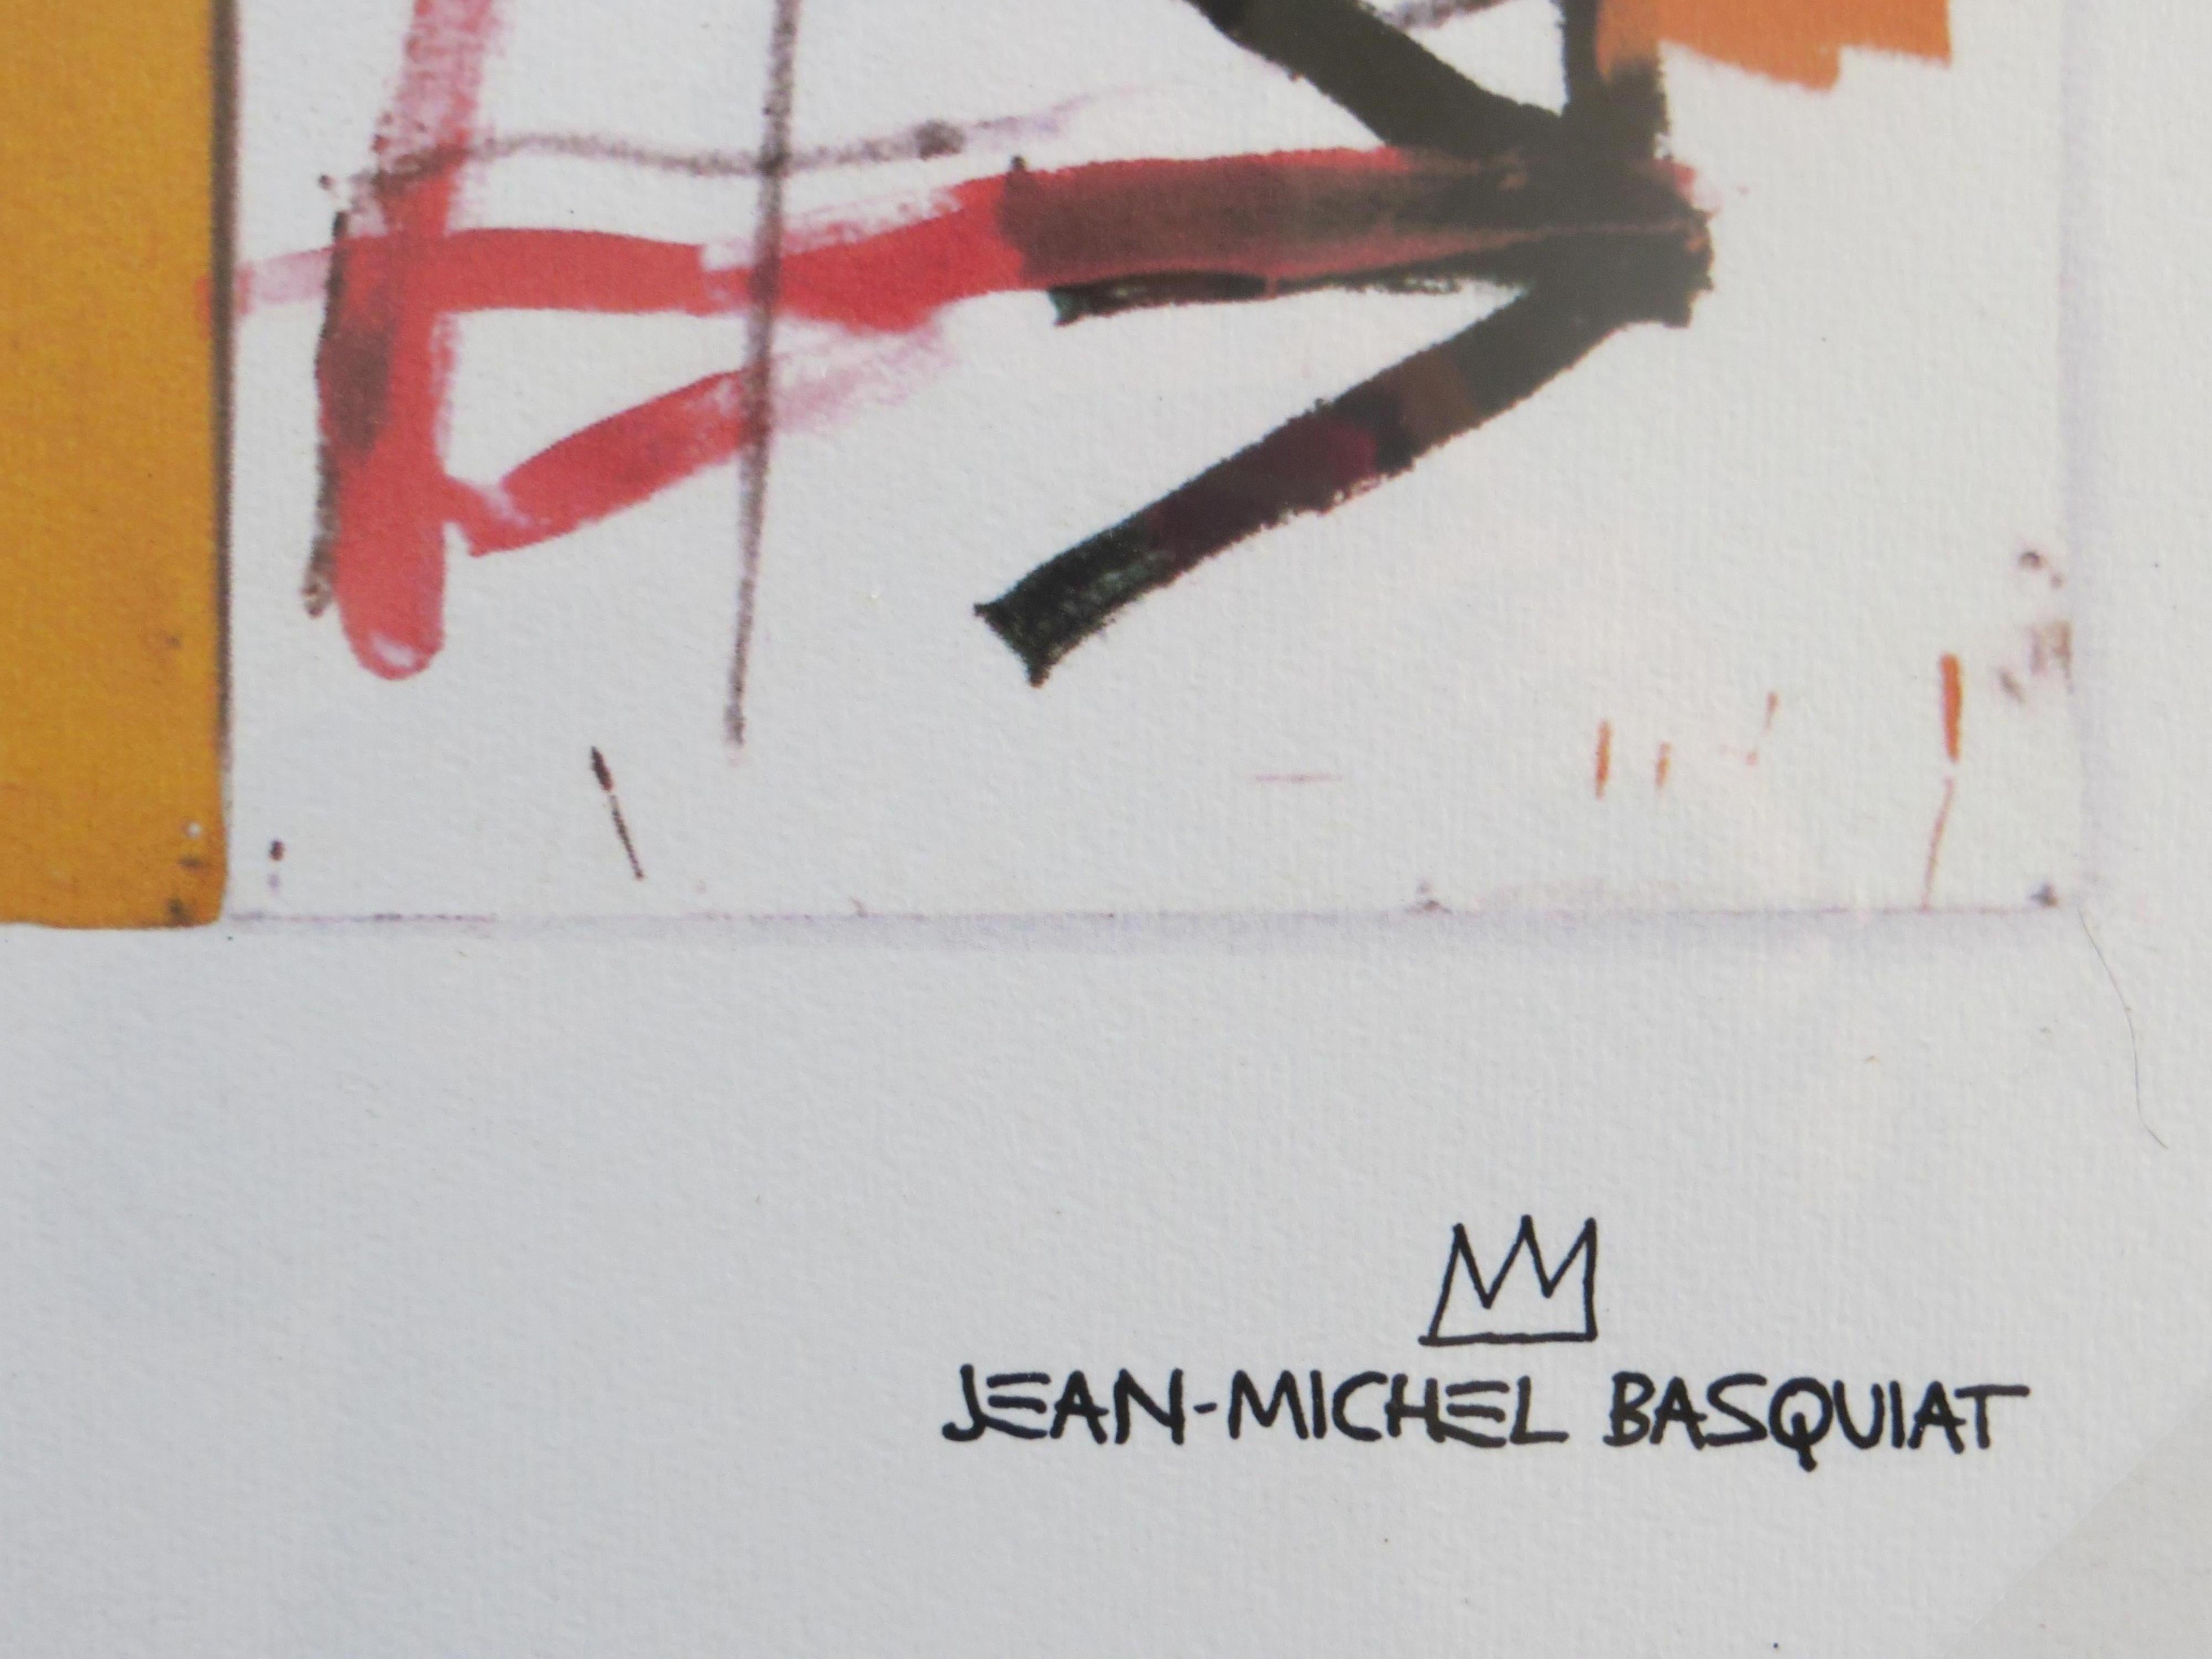 The Estate of Jean-Michel Basquiat,  Lithograph 126/300 - Print by (after) Jean-Michel Basquiat